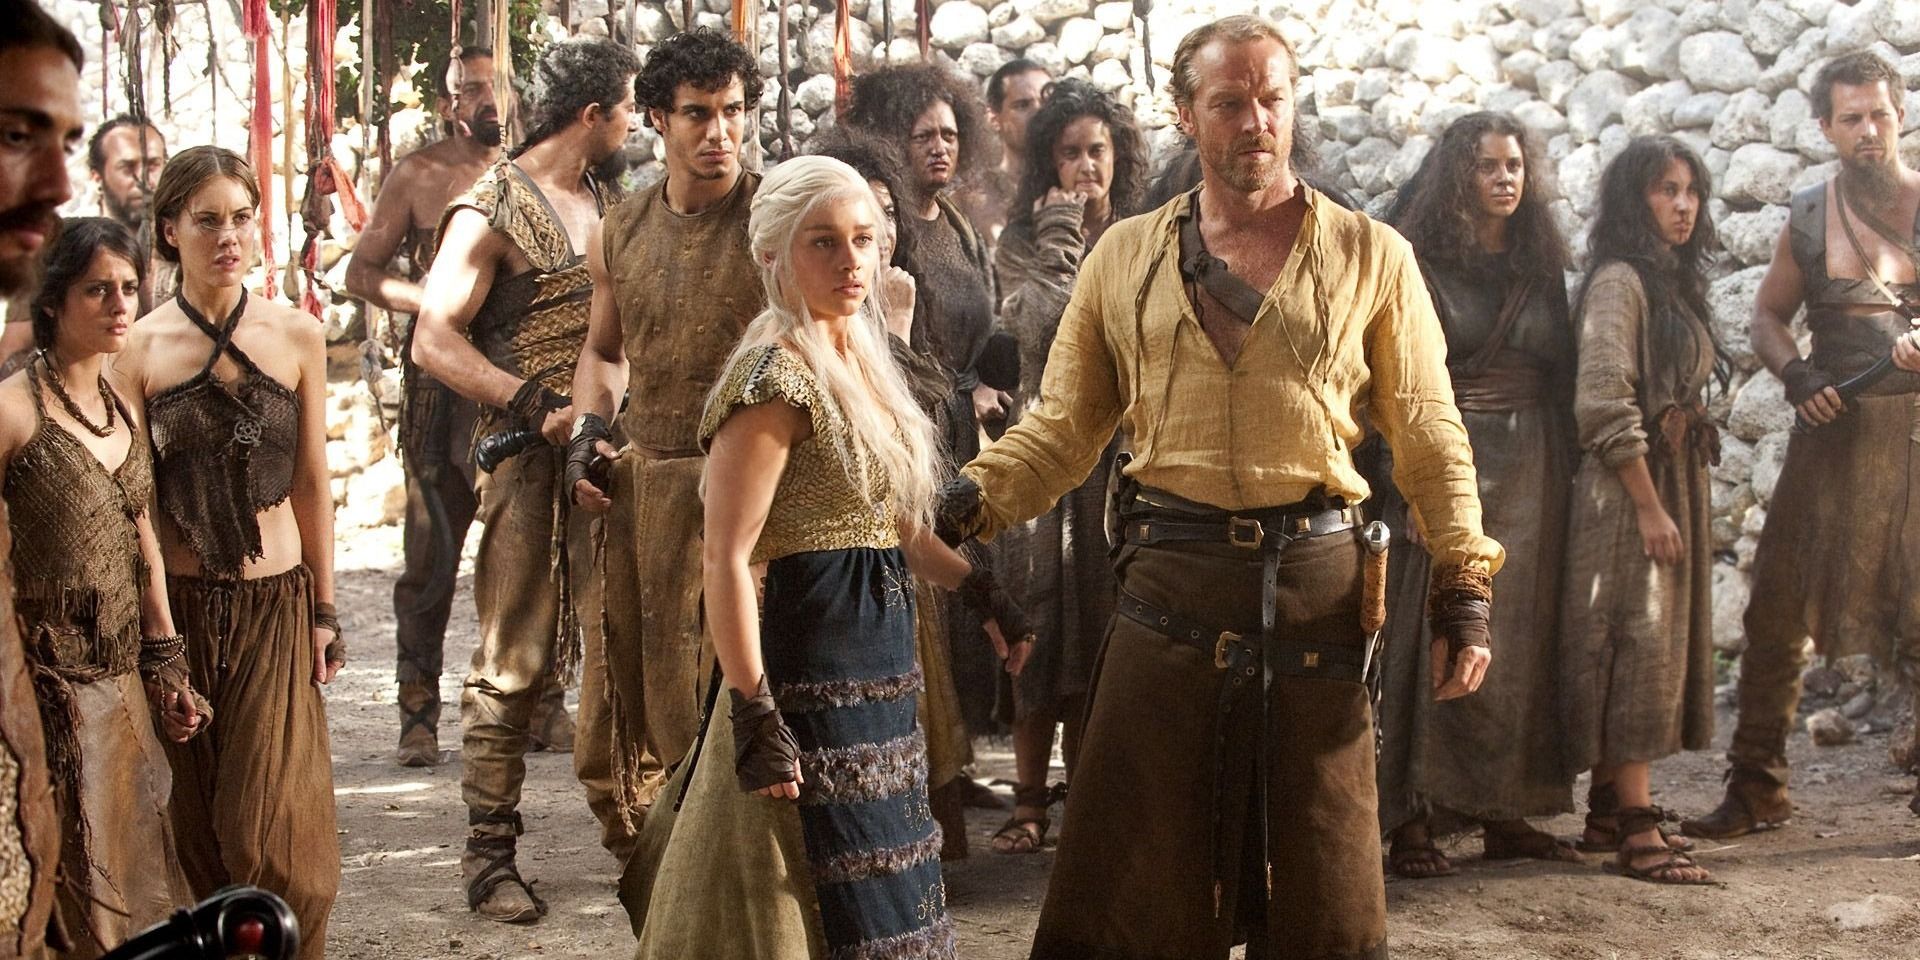 Daenerys and Jorah Mormont with the Dothraki behind them in Game of Thrones.